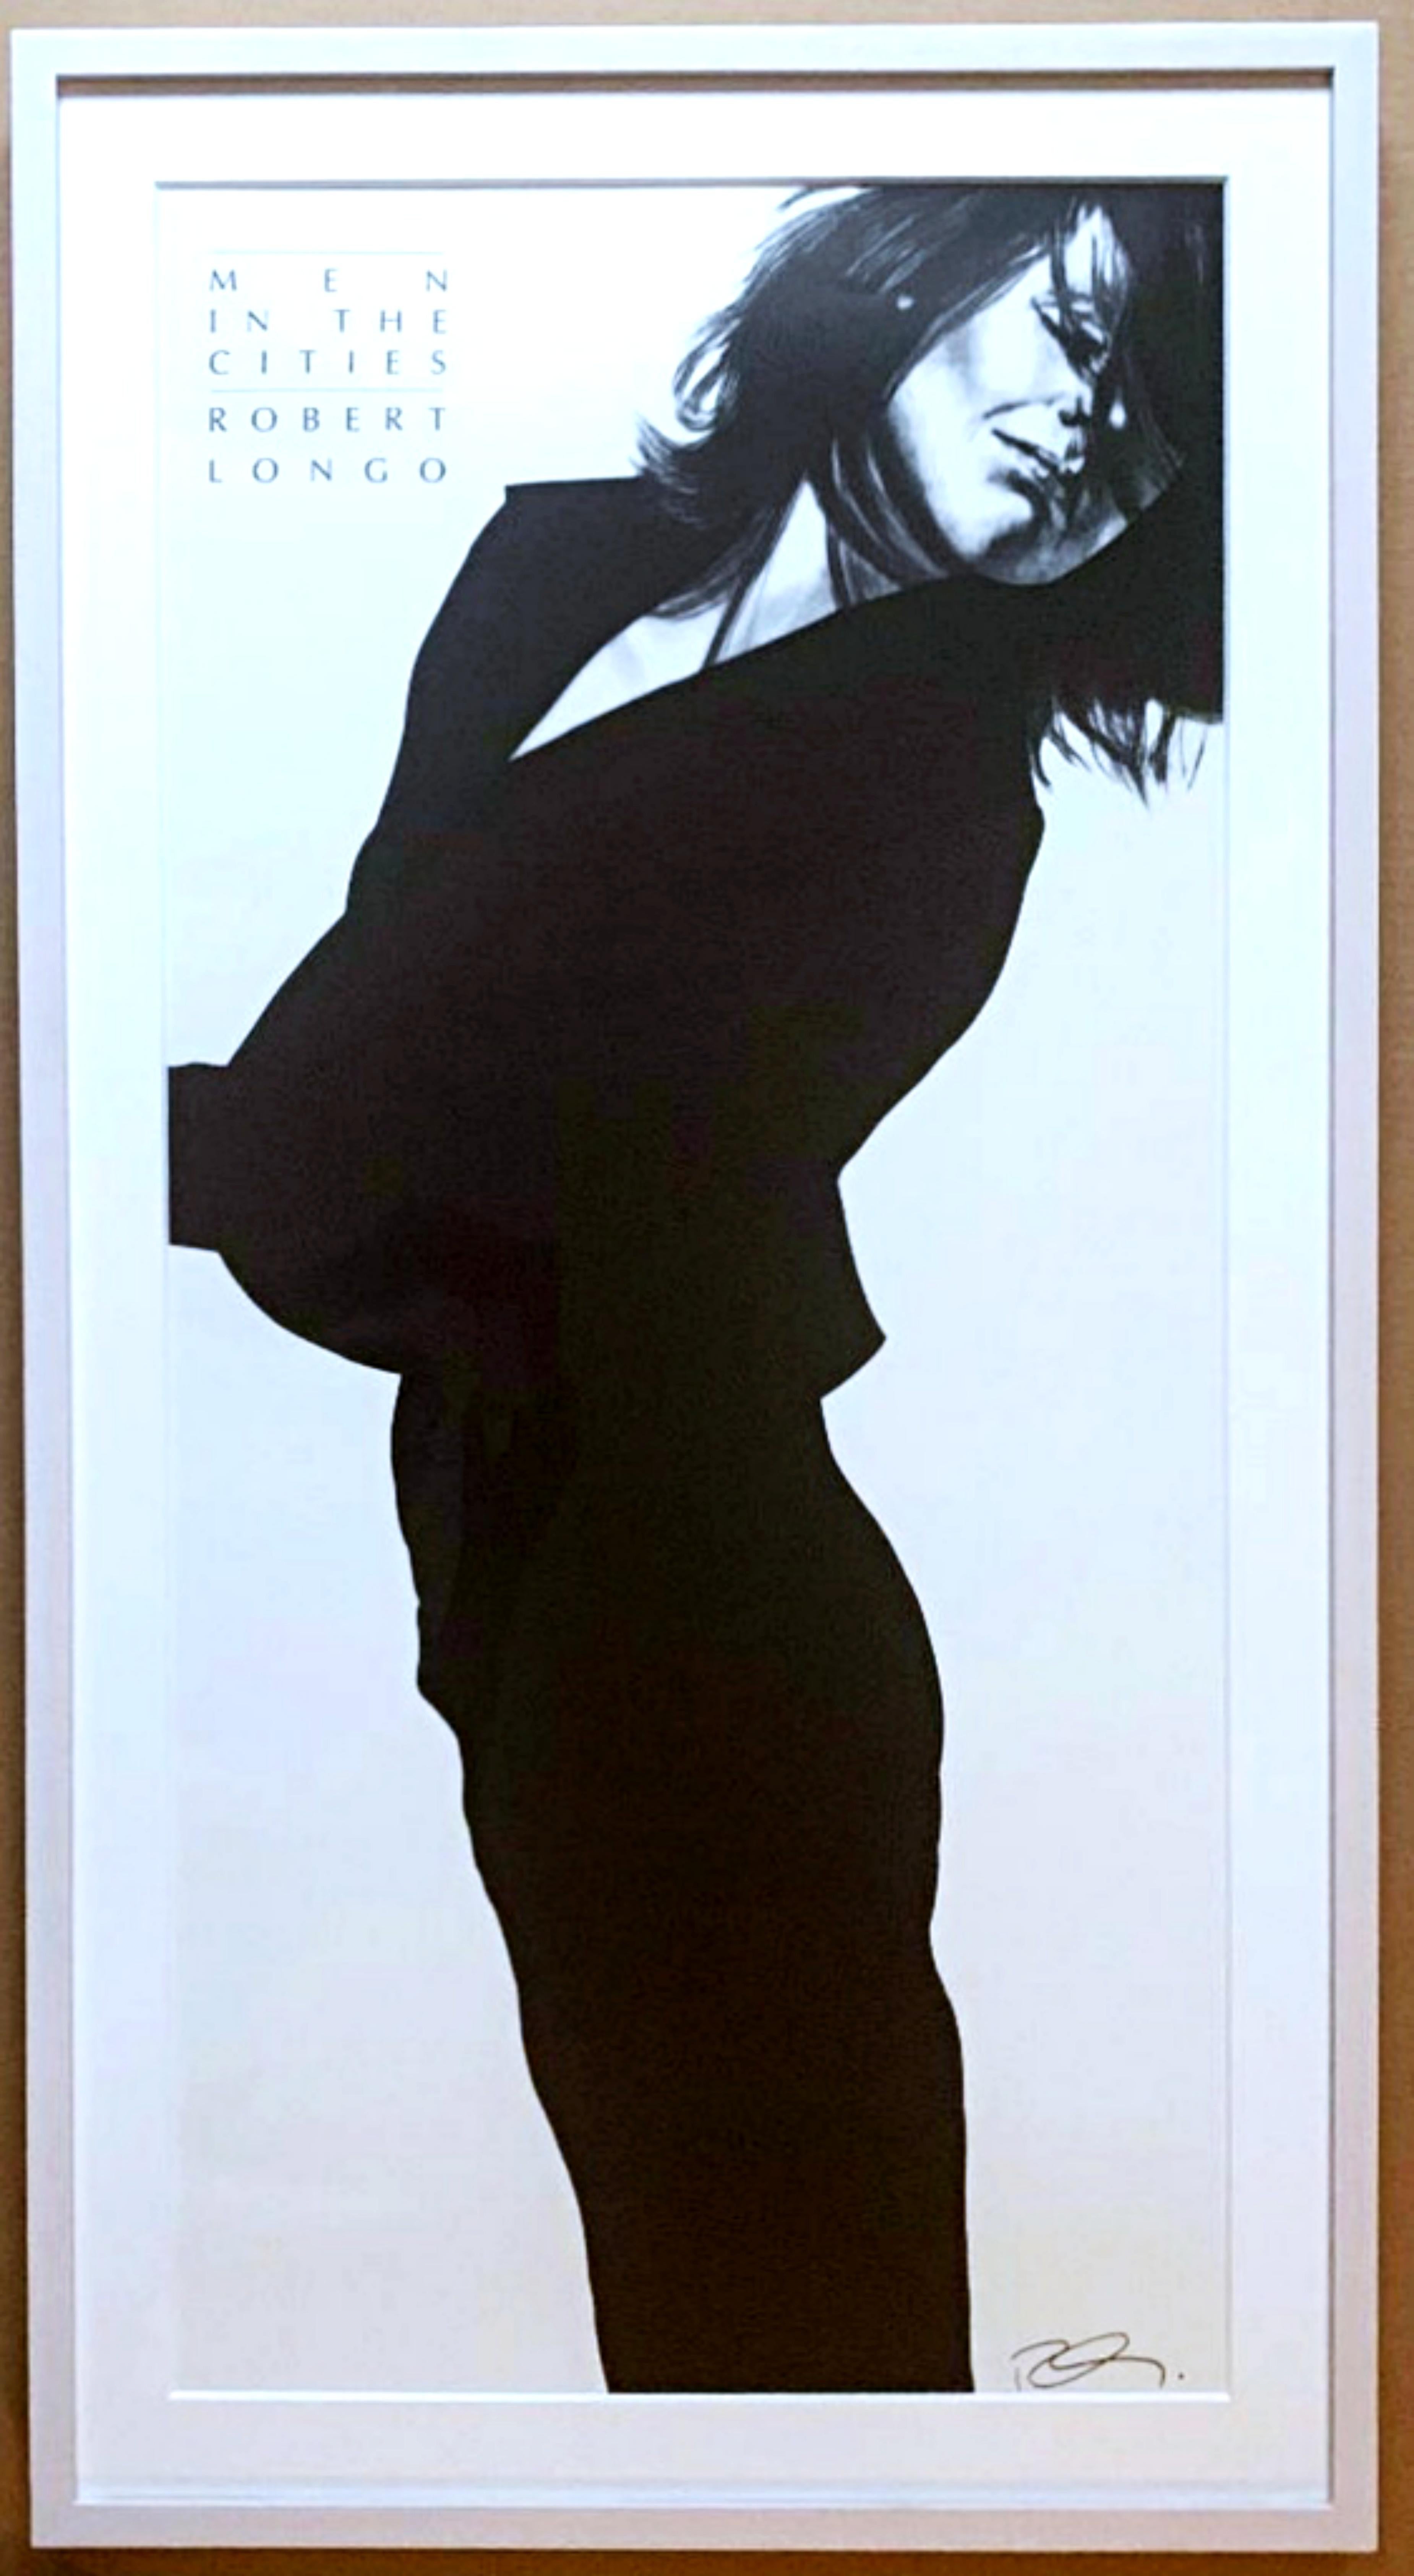 Robert Longo
(Wo)Men In the Cities - Gretchen (Hand Signed), 1991
Limited Edition Offset Lithograph
Frame included
Edition of 100
Hand signed lower right front; unnumbered
Published by Amnesty International and Act-Up
This offset lithograph is based